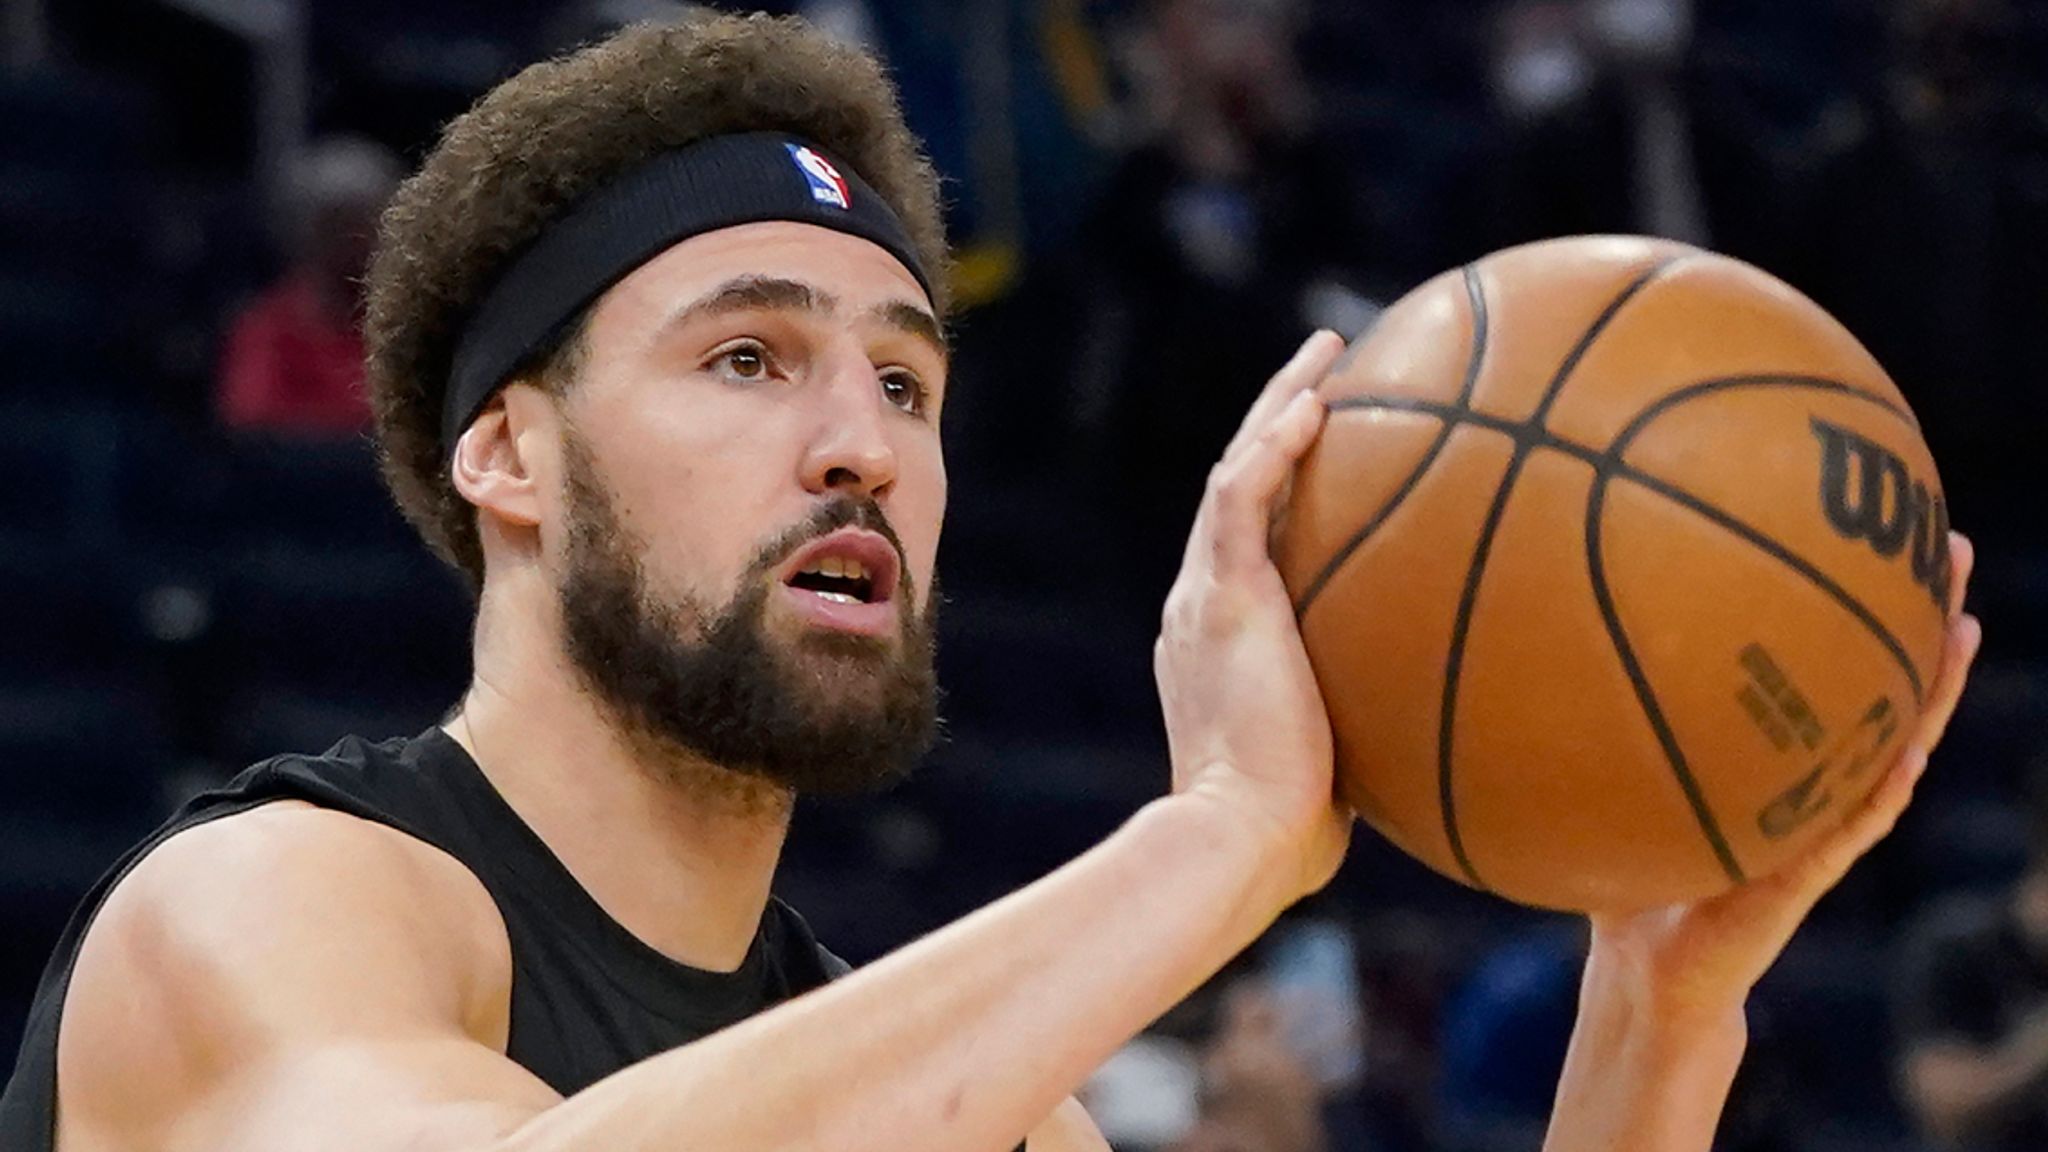 Klay Thompson will not play this season, Golden State Warriors